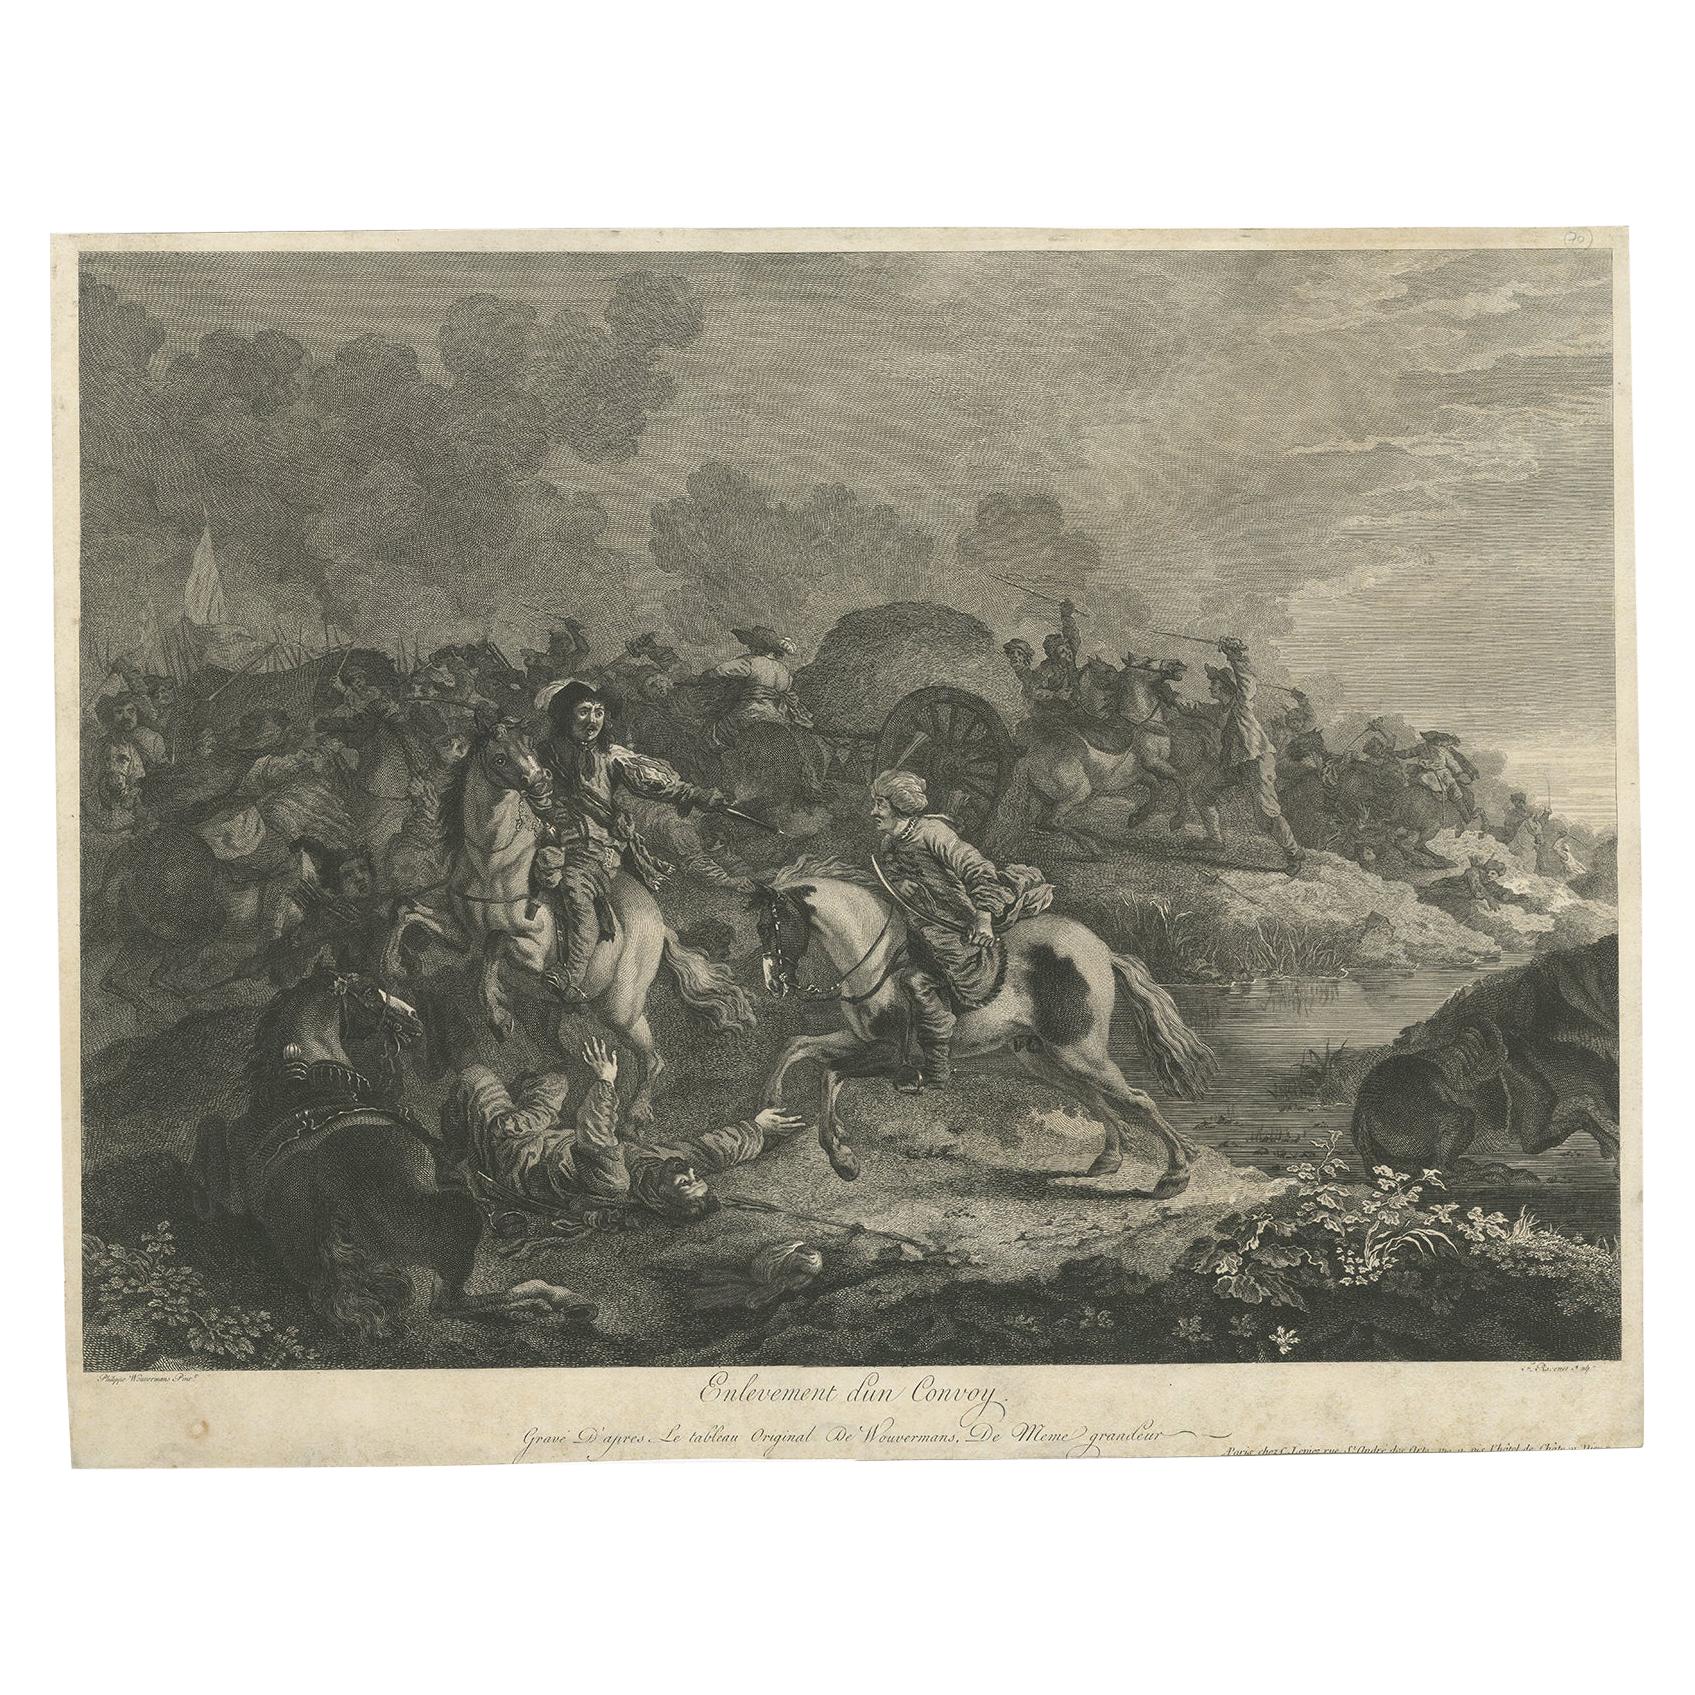 Antique Print of Soldiers Attacking an Ottoman Convoy by Leviez, circa 1778